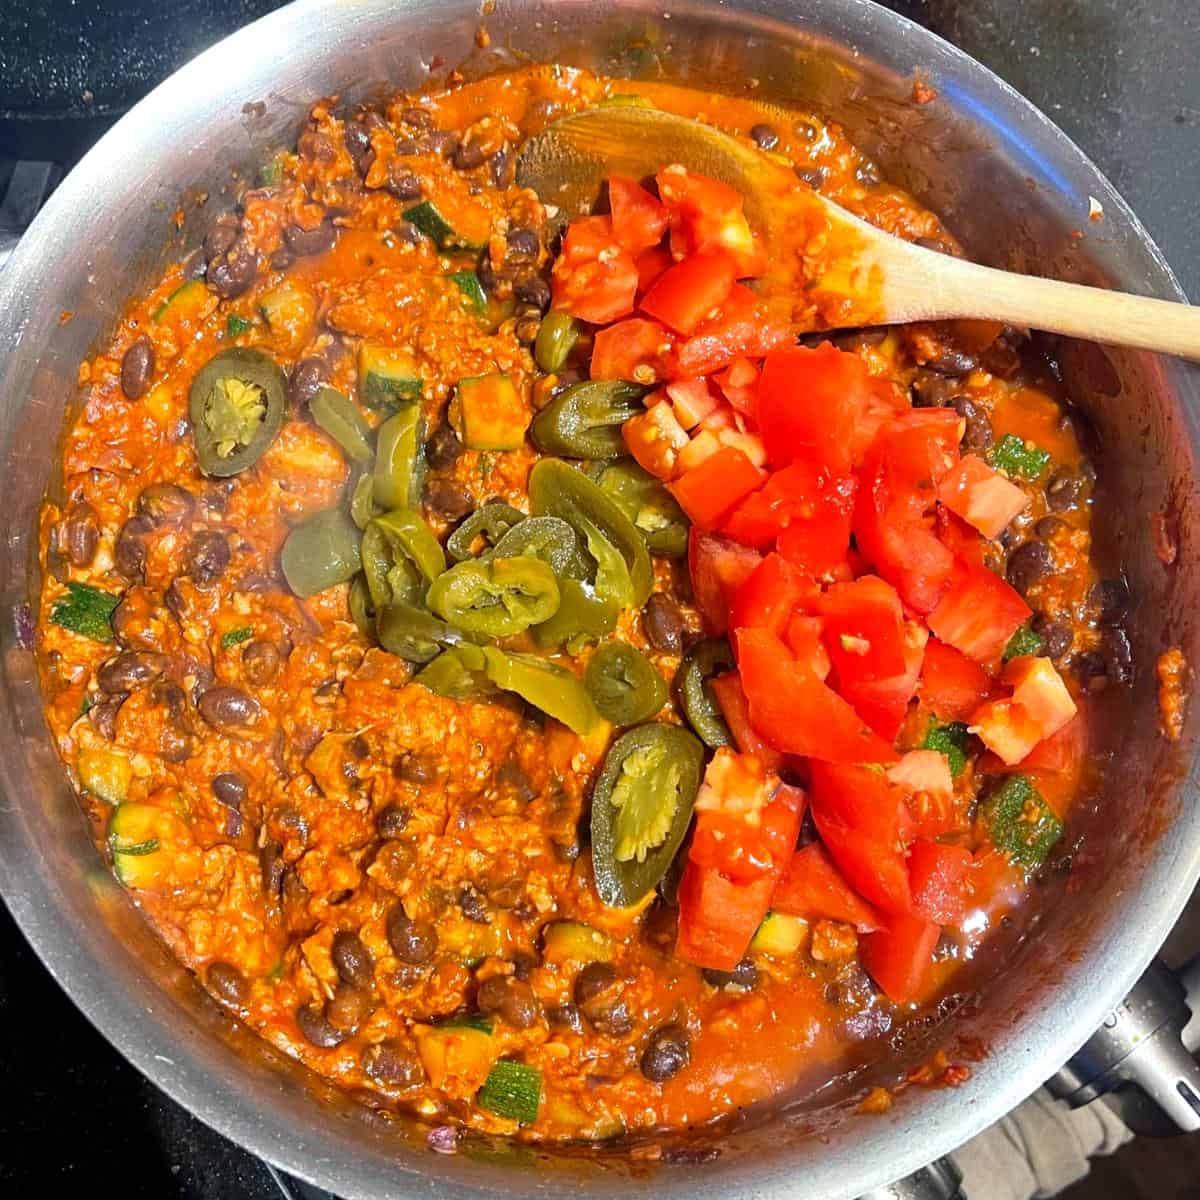 Tomatoes and jalapeno peppers added to chili in saucepan.